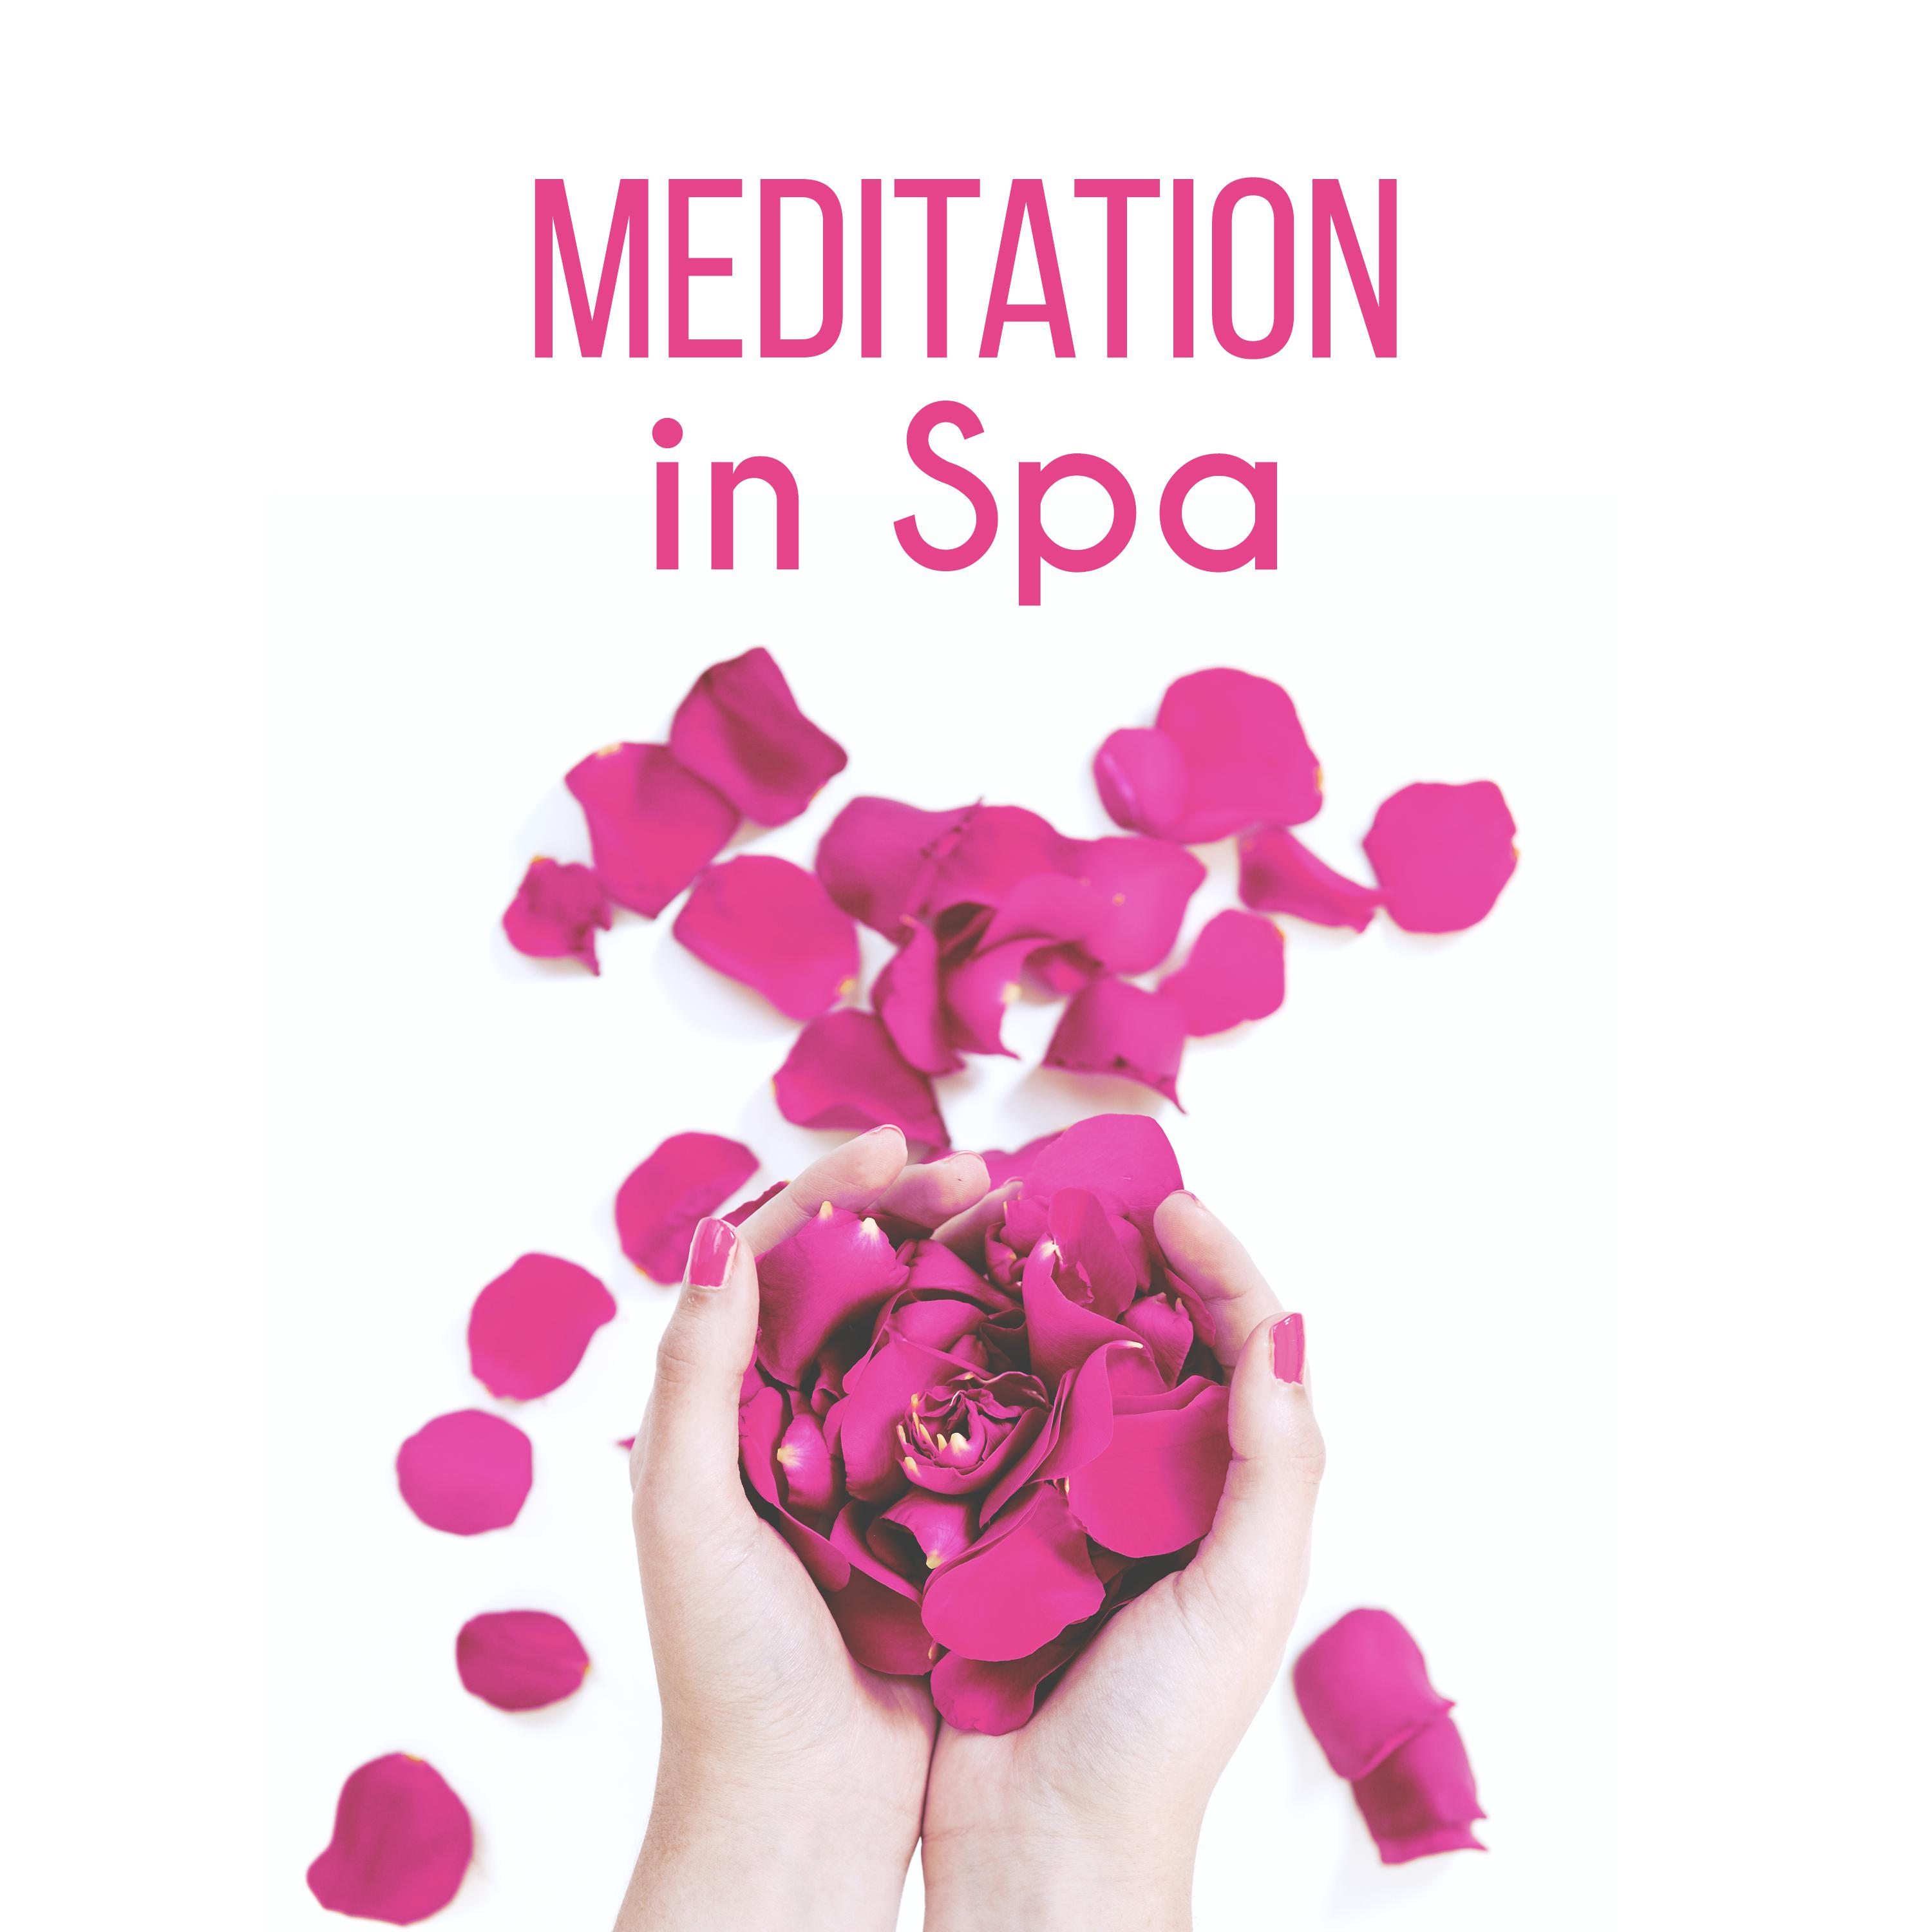 Meditation in Spa – Relaxation Music of Nature Sounds to Relax, Spa, Wellness, Sleep Relaxation, Healing Massage, Inner Power